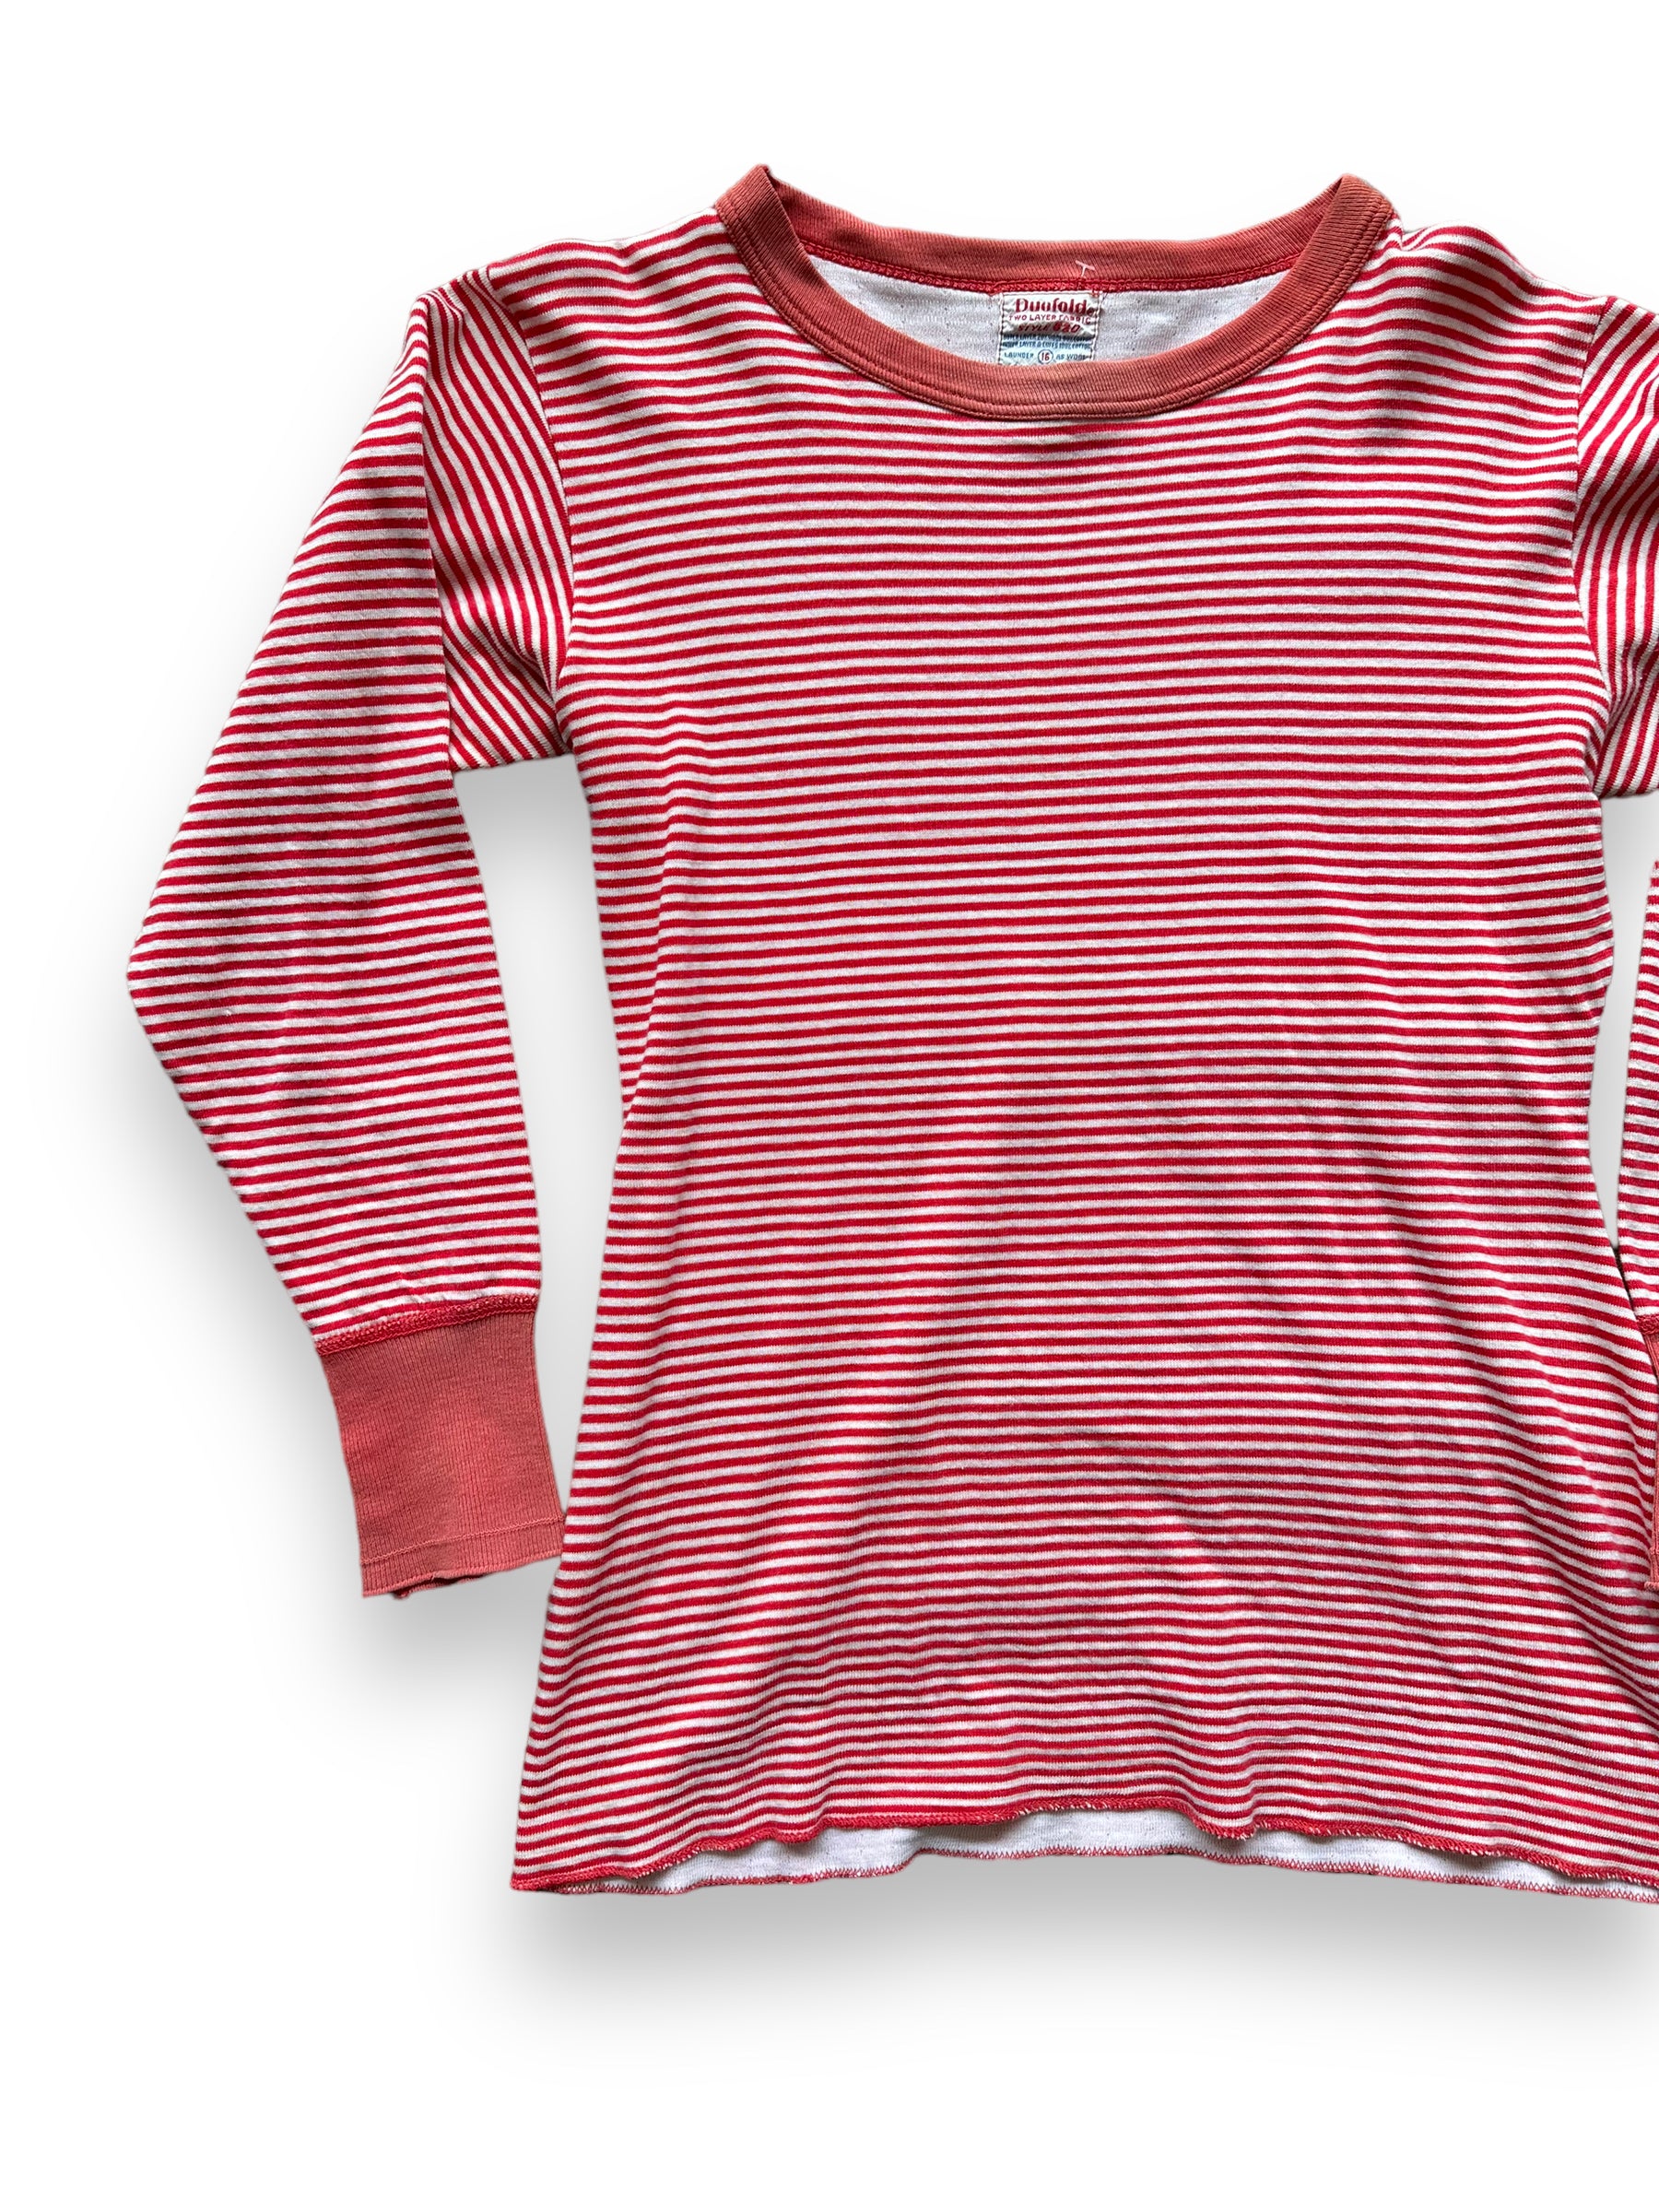 Front Right View on Vintage Duofold Striped Thermal Top SZ M | Vintage Thermal Underwear Seattle | Barn Owl Vintage Goods